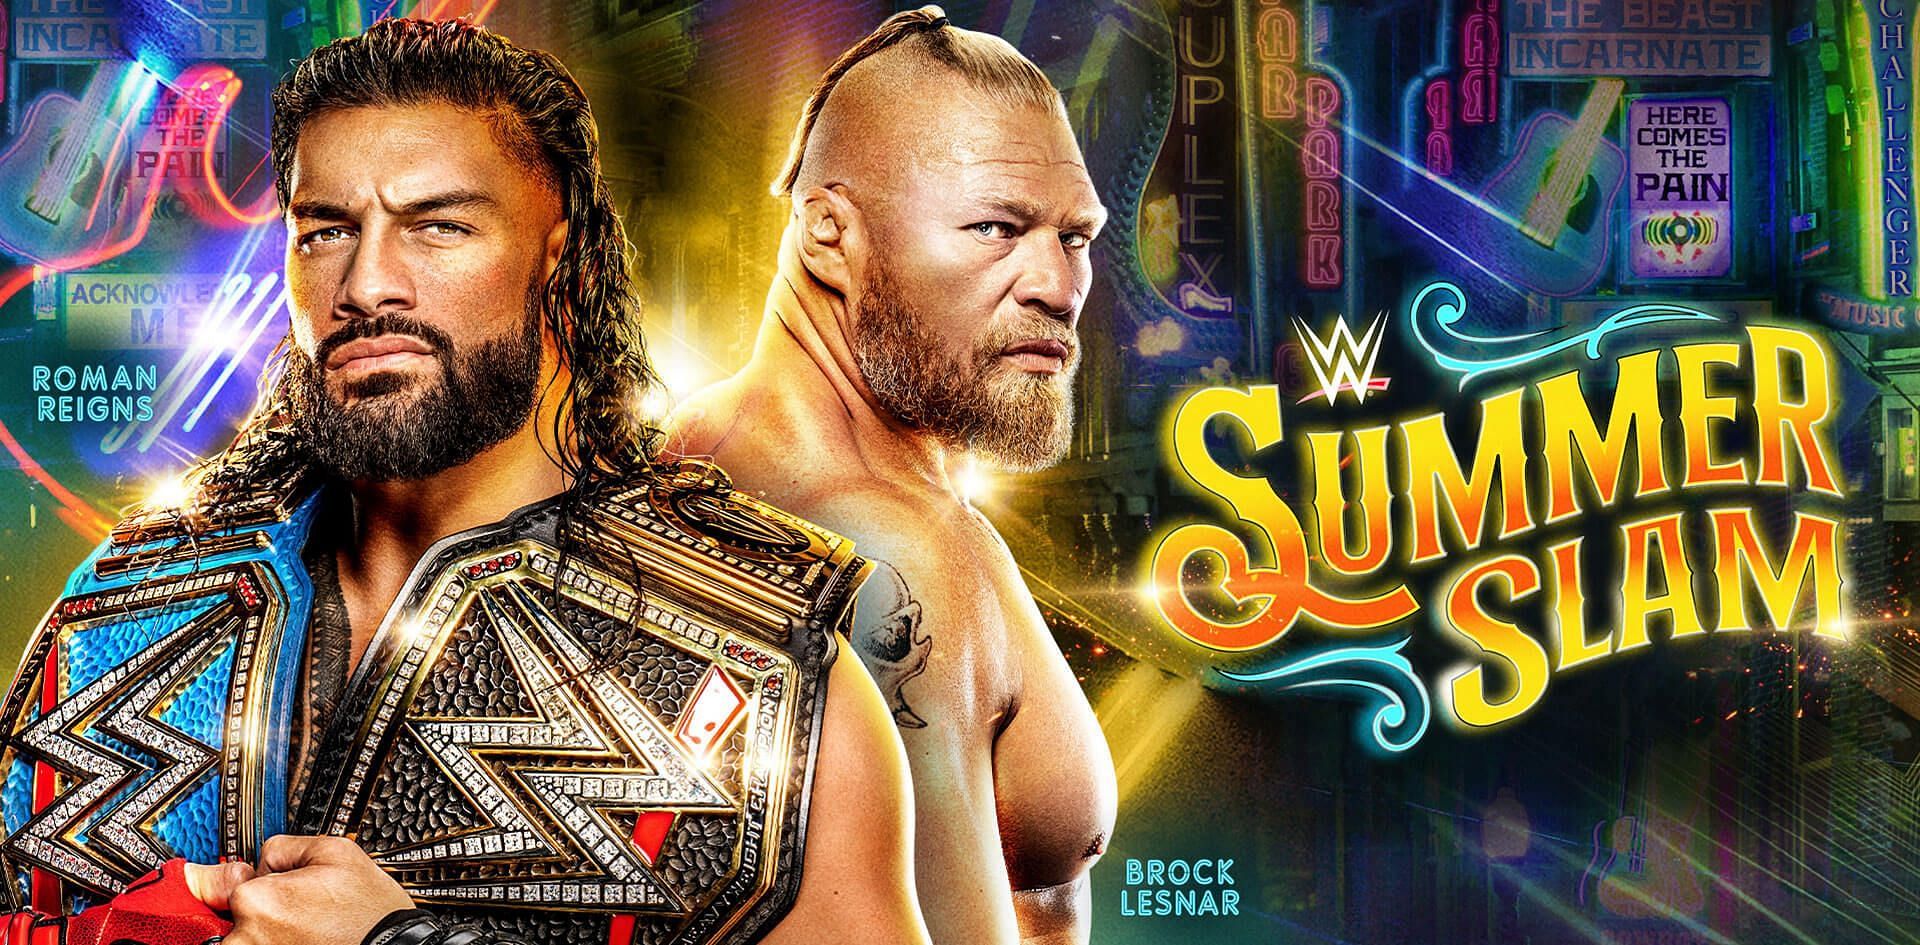 Roman Reigns and Brock Lesnar main evented SummerSlam